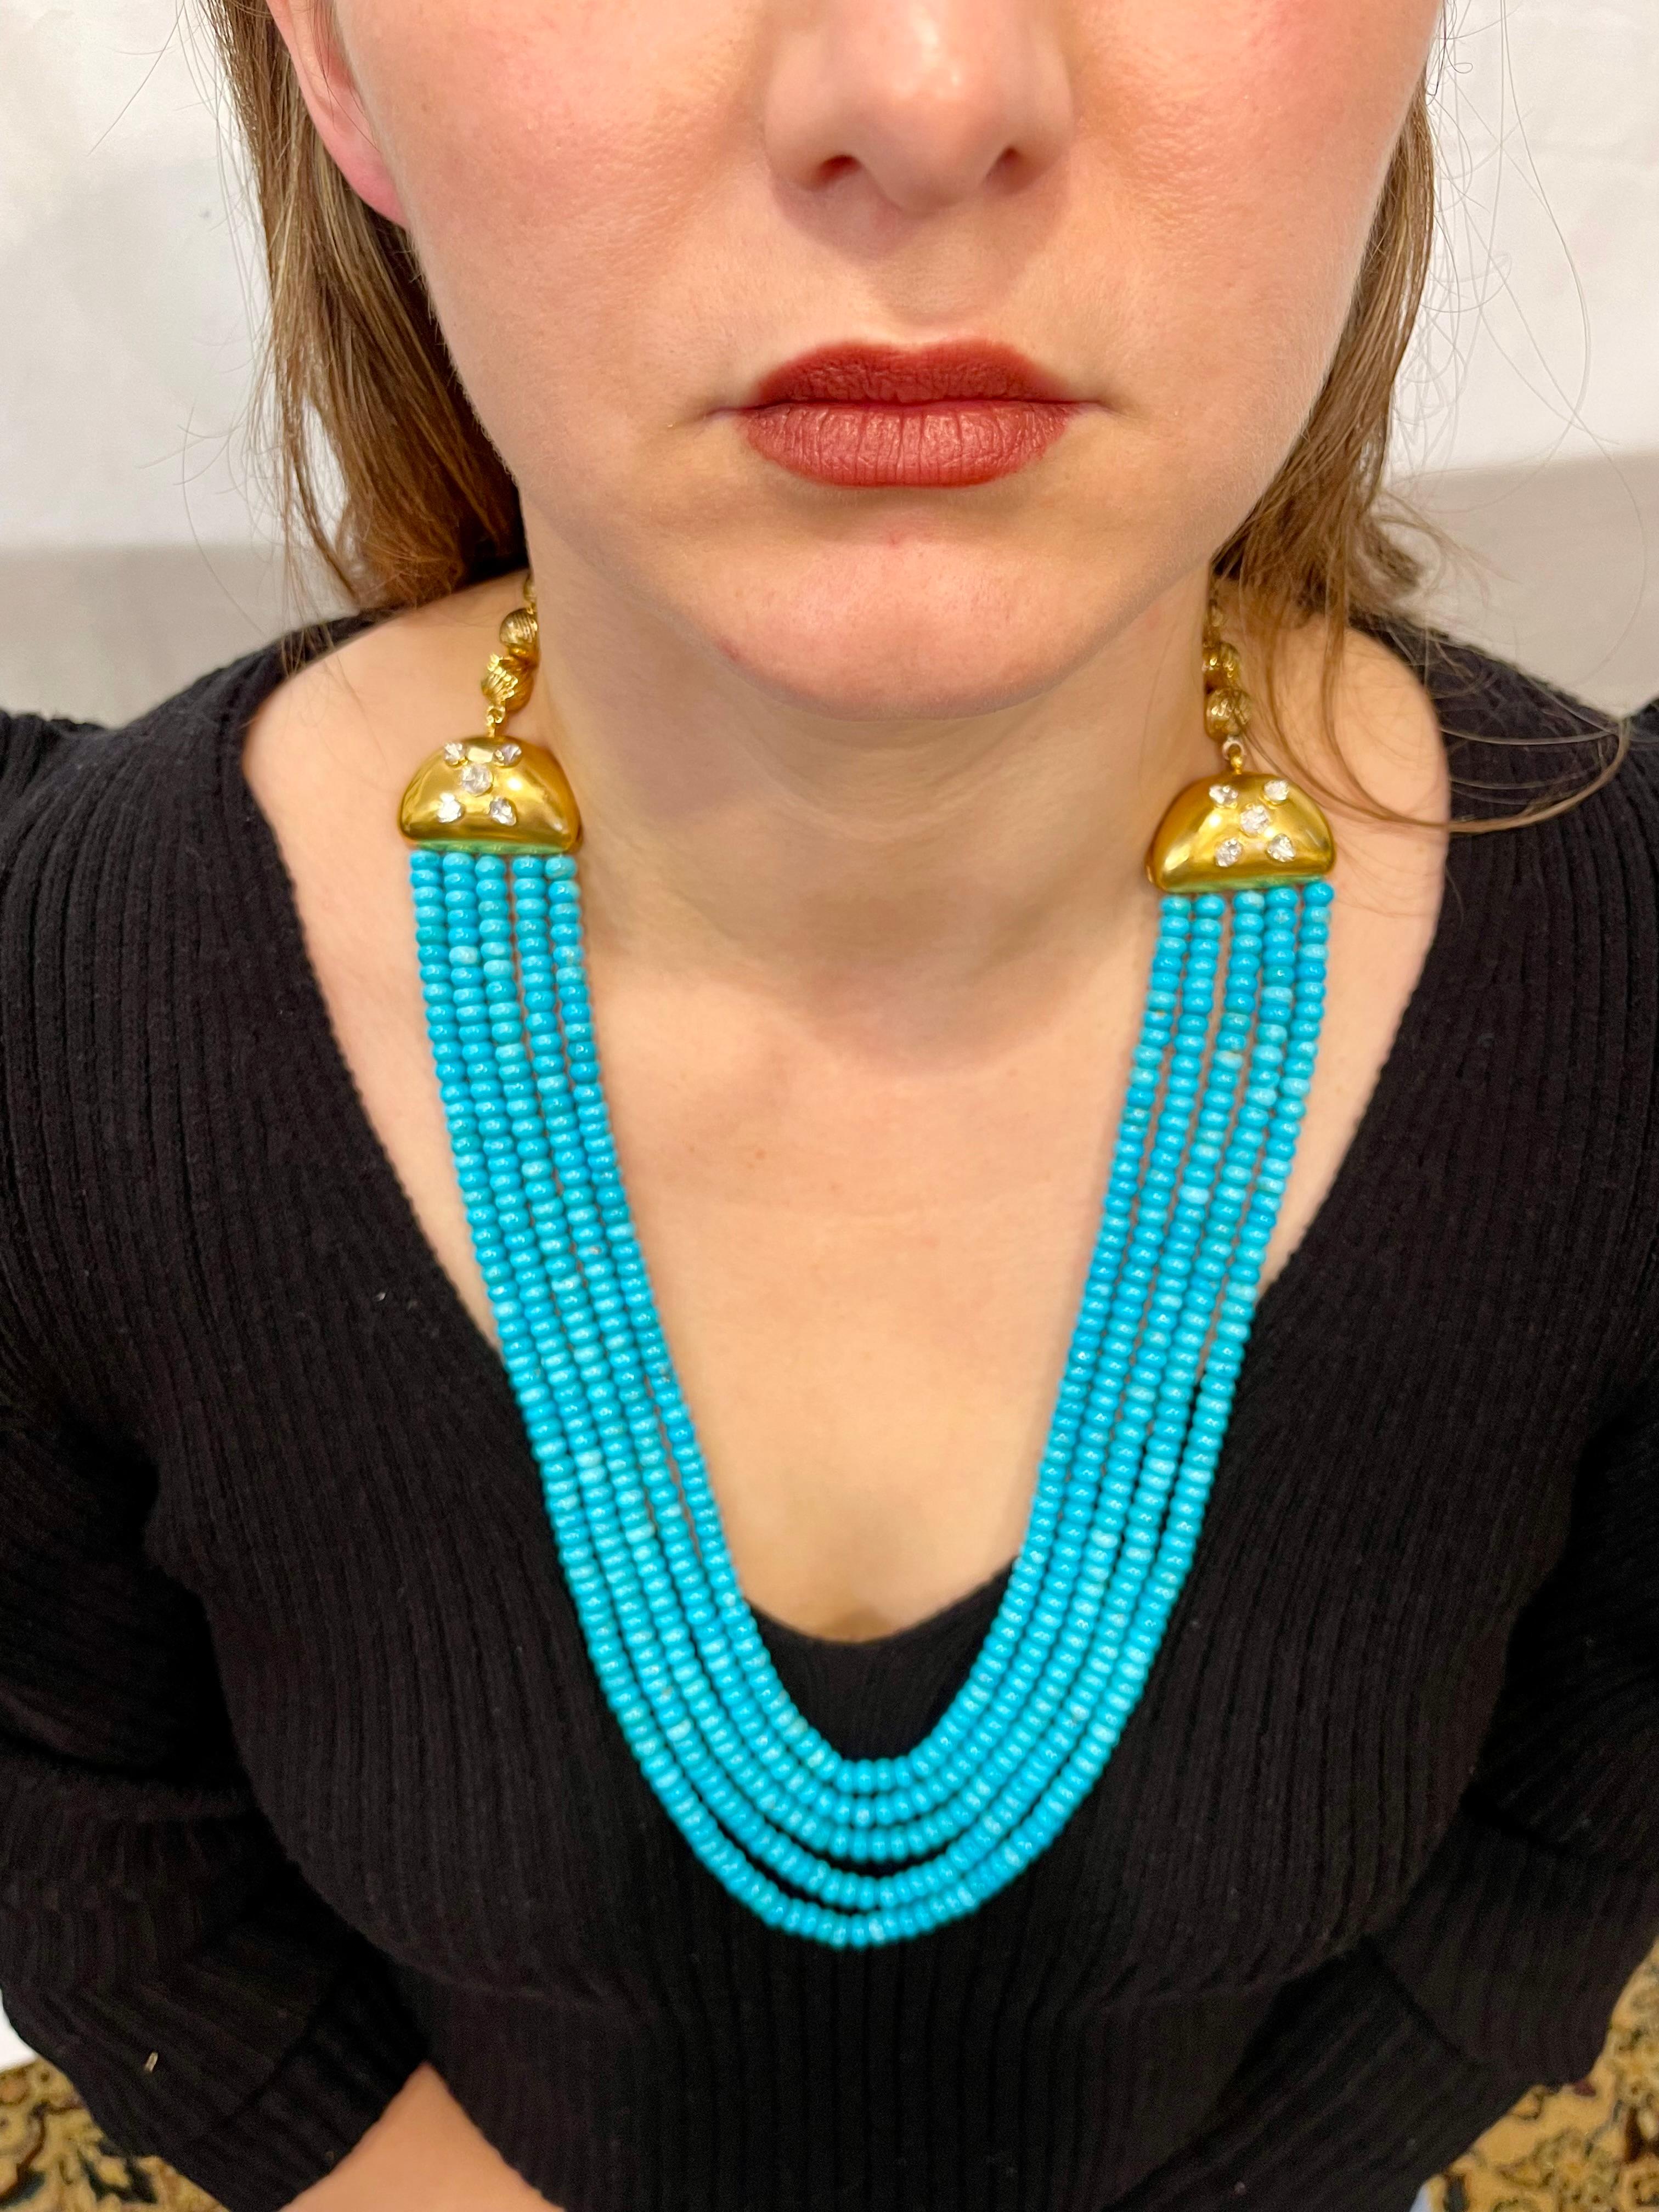 Approximately 700 Carat Natural Sleeping Beauty Turquoise Necklace with  Diamonds on the gold divider and  5 Strand 14 Karat Gold
Natural Sleeping Beauty Turquoise which is very hard to find now.
Necklace has 5 strand
Approximately 5. 5 to 6.5 mm